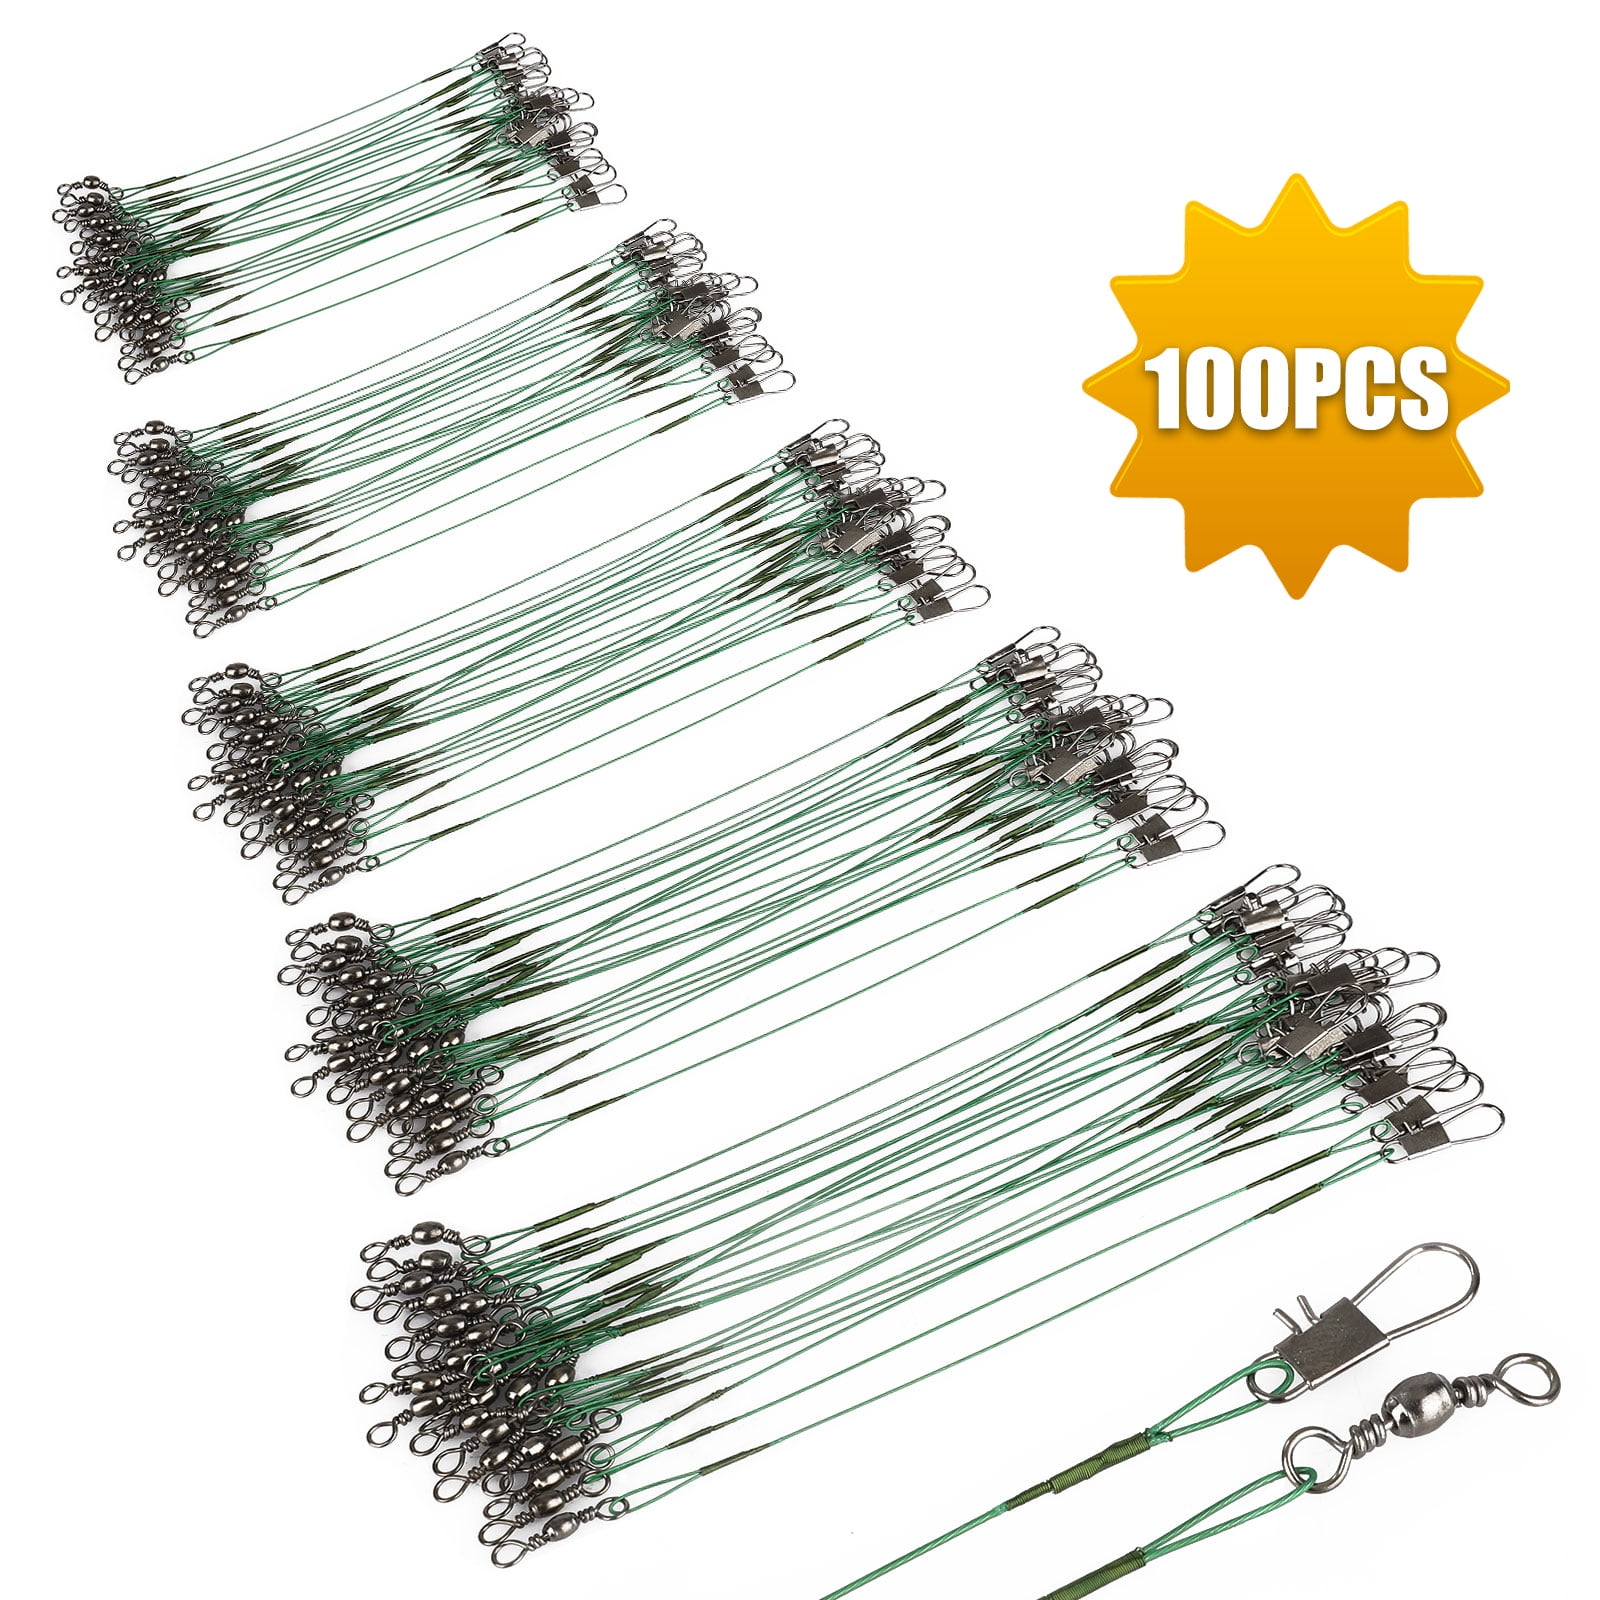 3pcs/lot Steel Fishing Lure Trace Rope Wire Leader With Swivel Fishing  Accessory Leadcore Leash Fishing